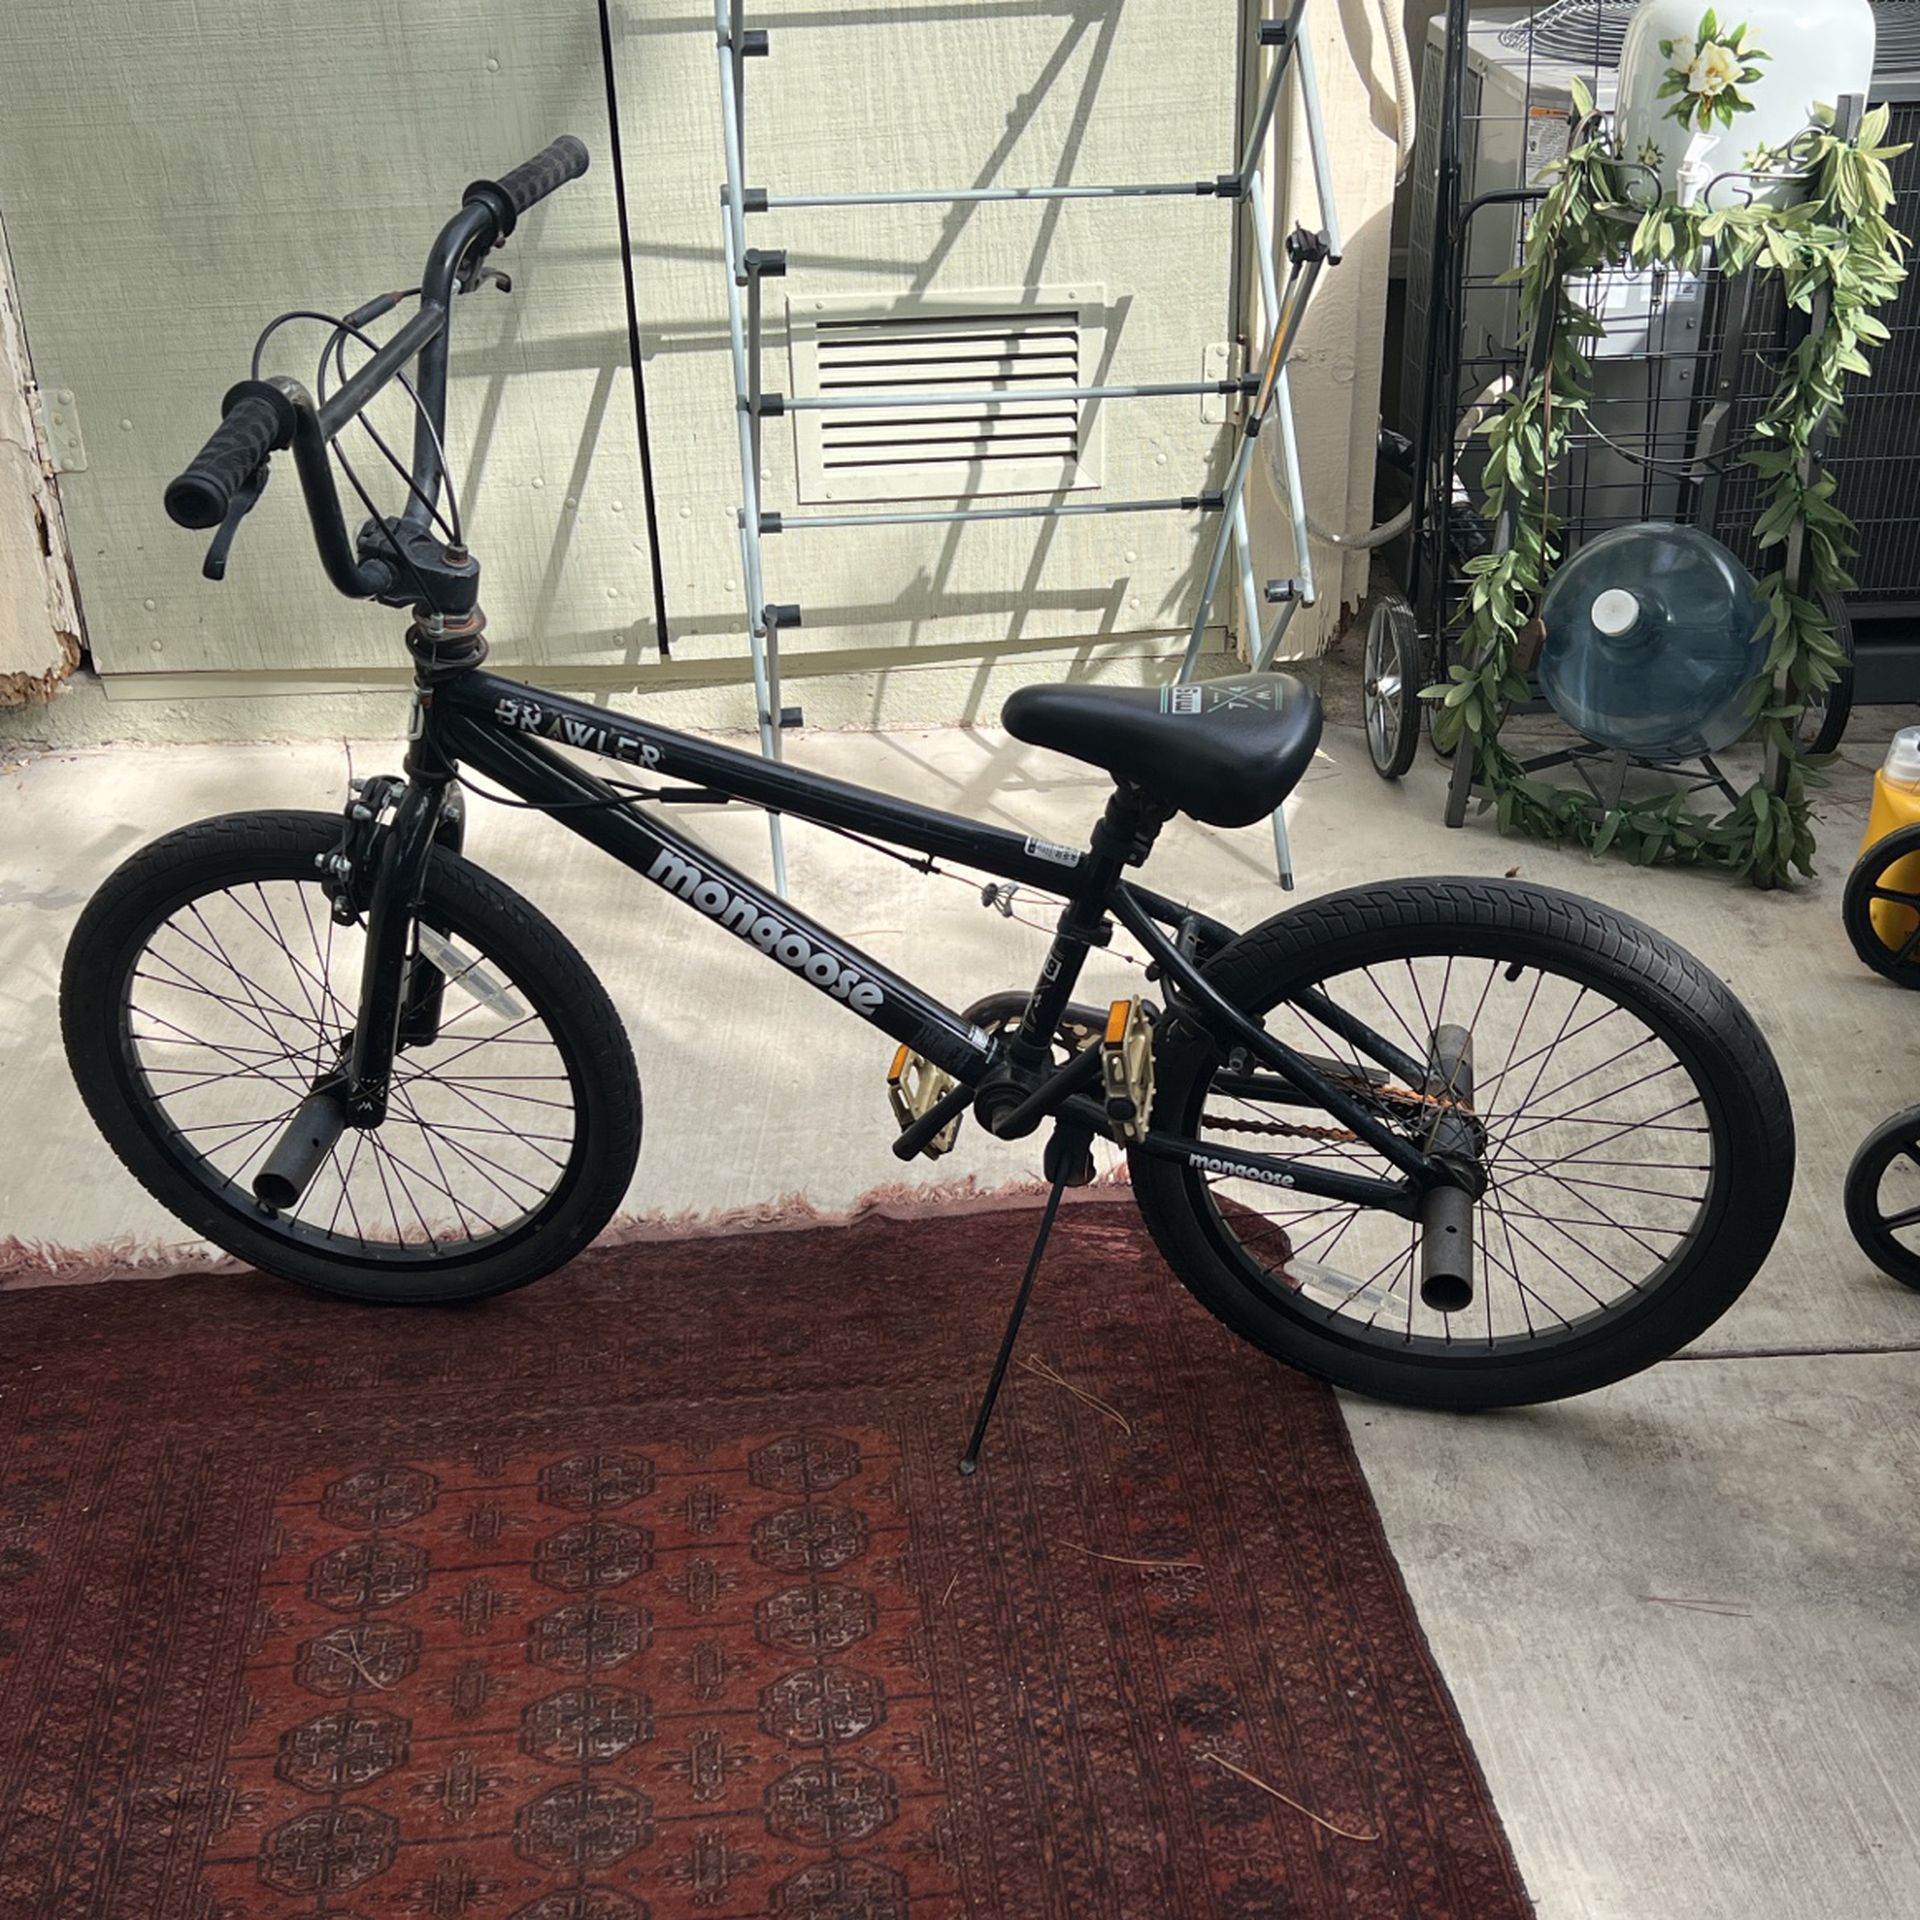 Sta op Permanent doos Bmx Mongoose Black And White 20inch for Sale in Irvine, CA - OfferUp